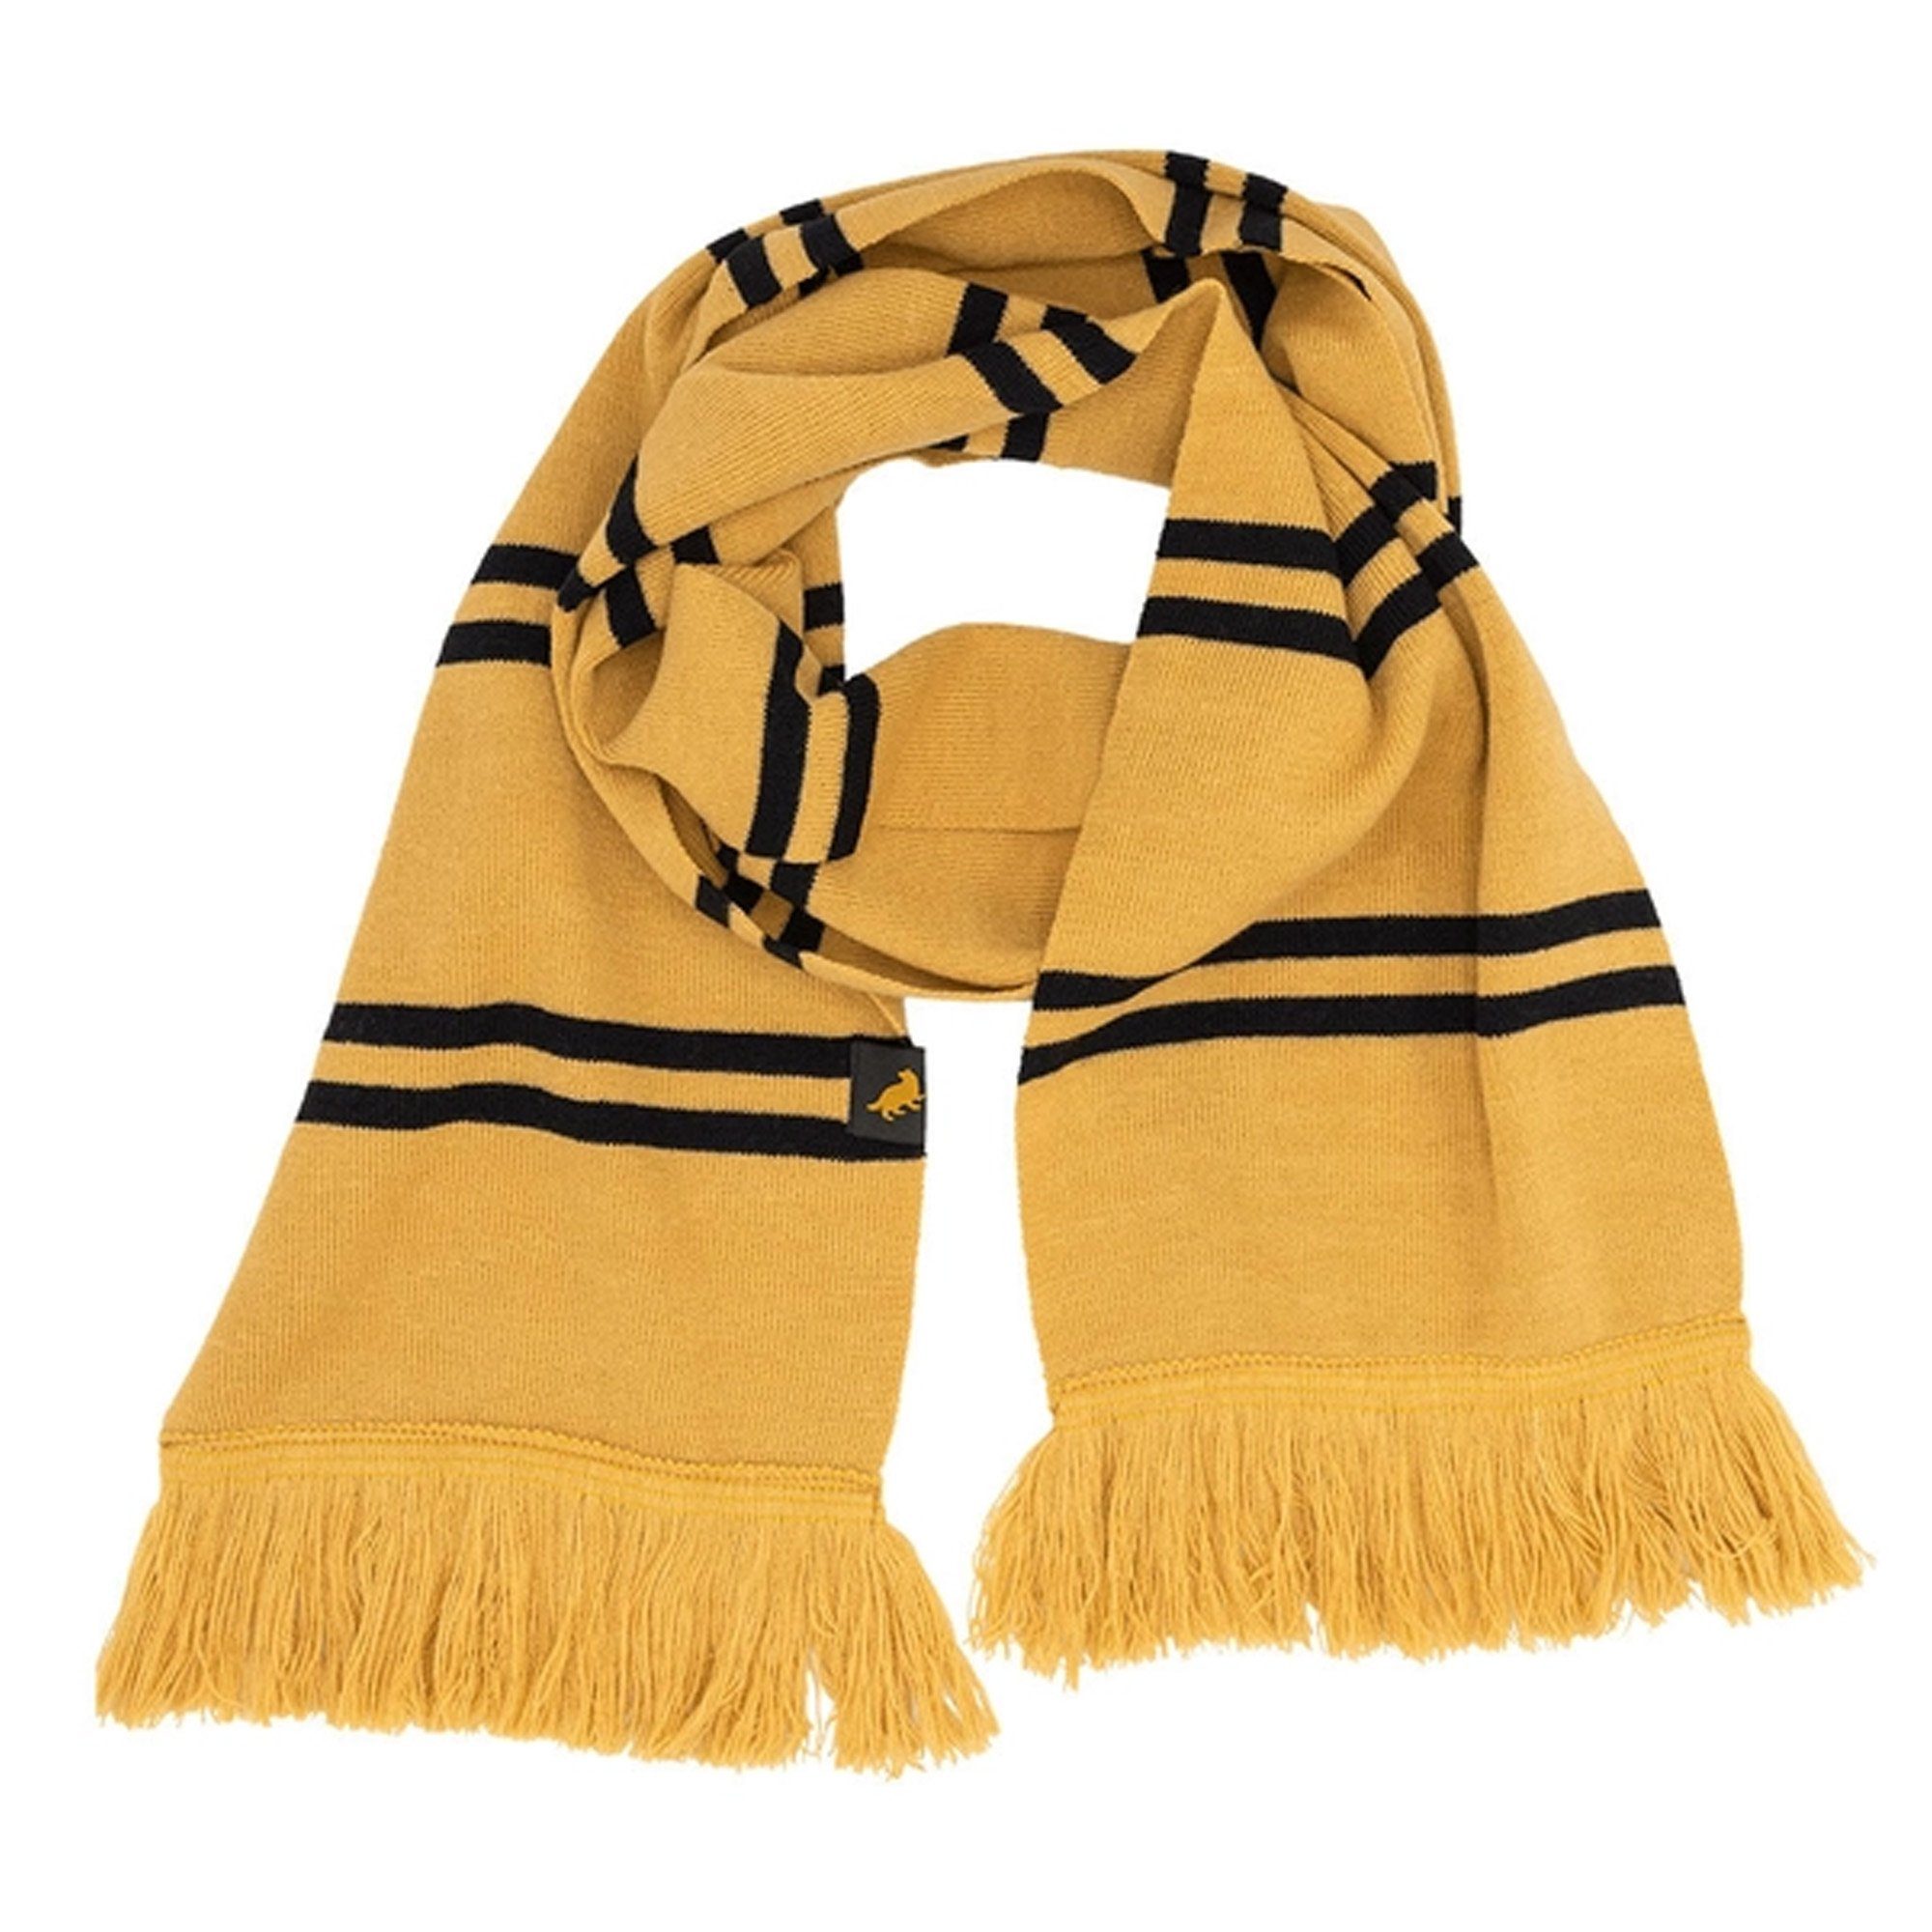 Cotton Division Schal Hufflepuff - Harry Potter